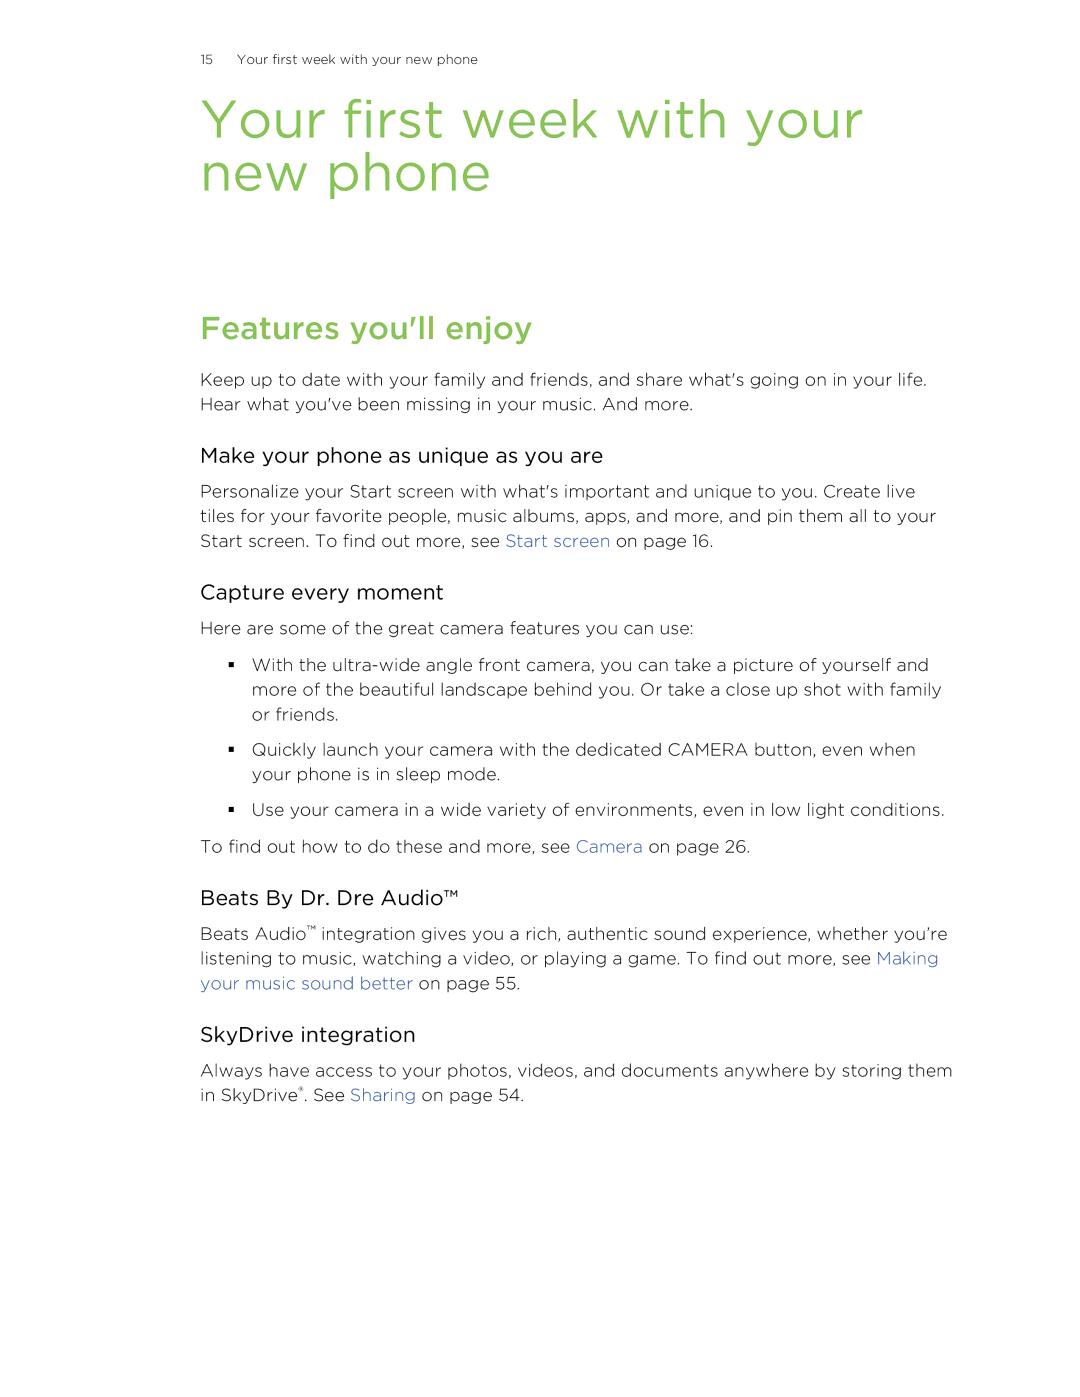 HTC 8X manual Your first week with your new phone, Features youll enjoy 